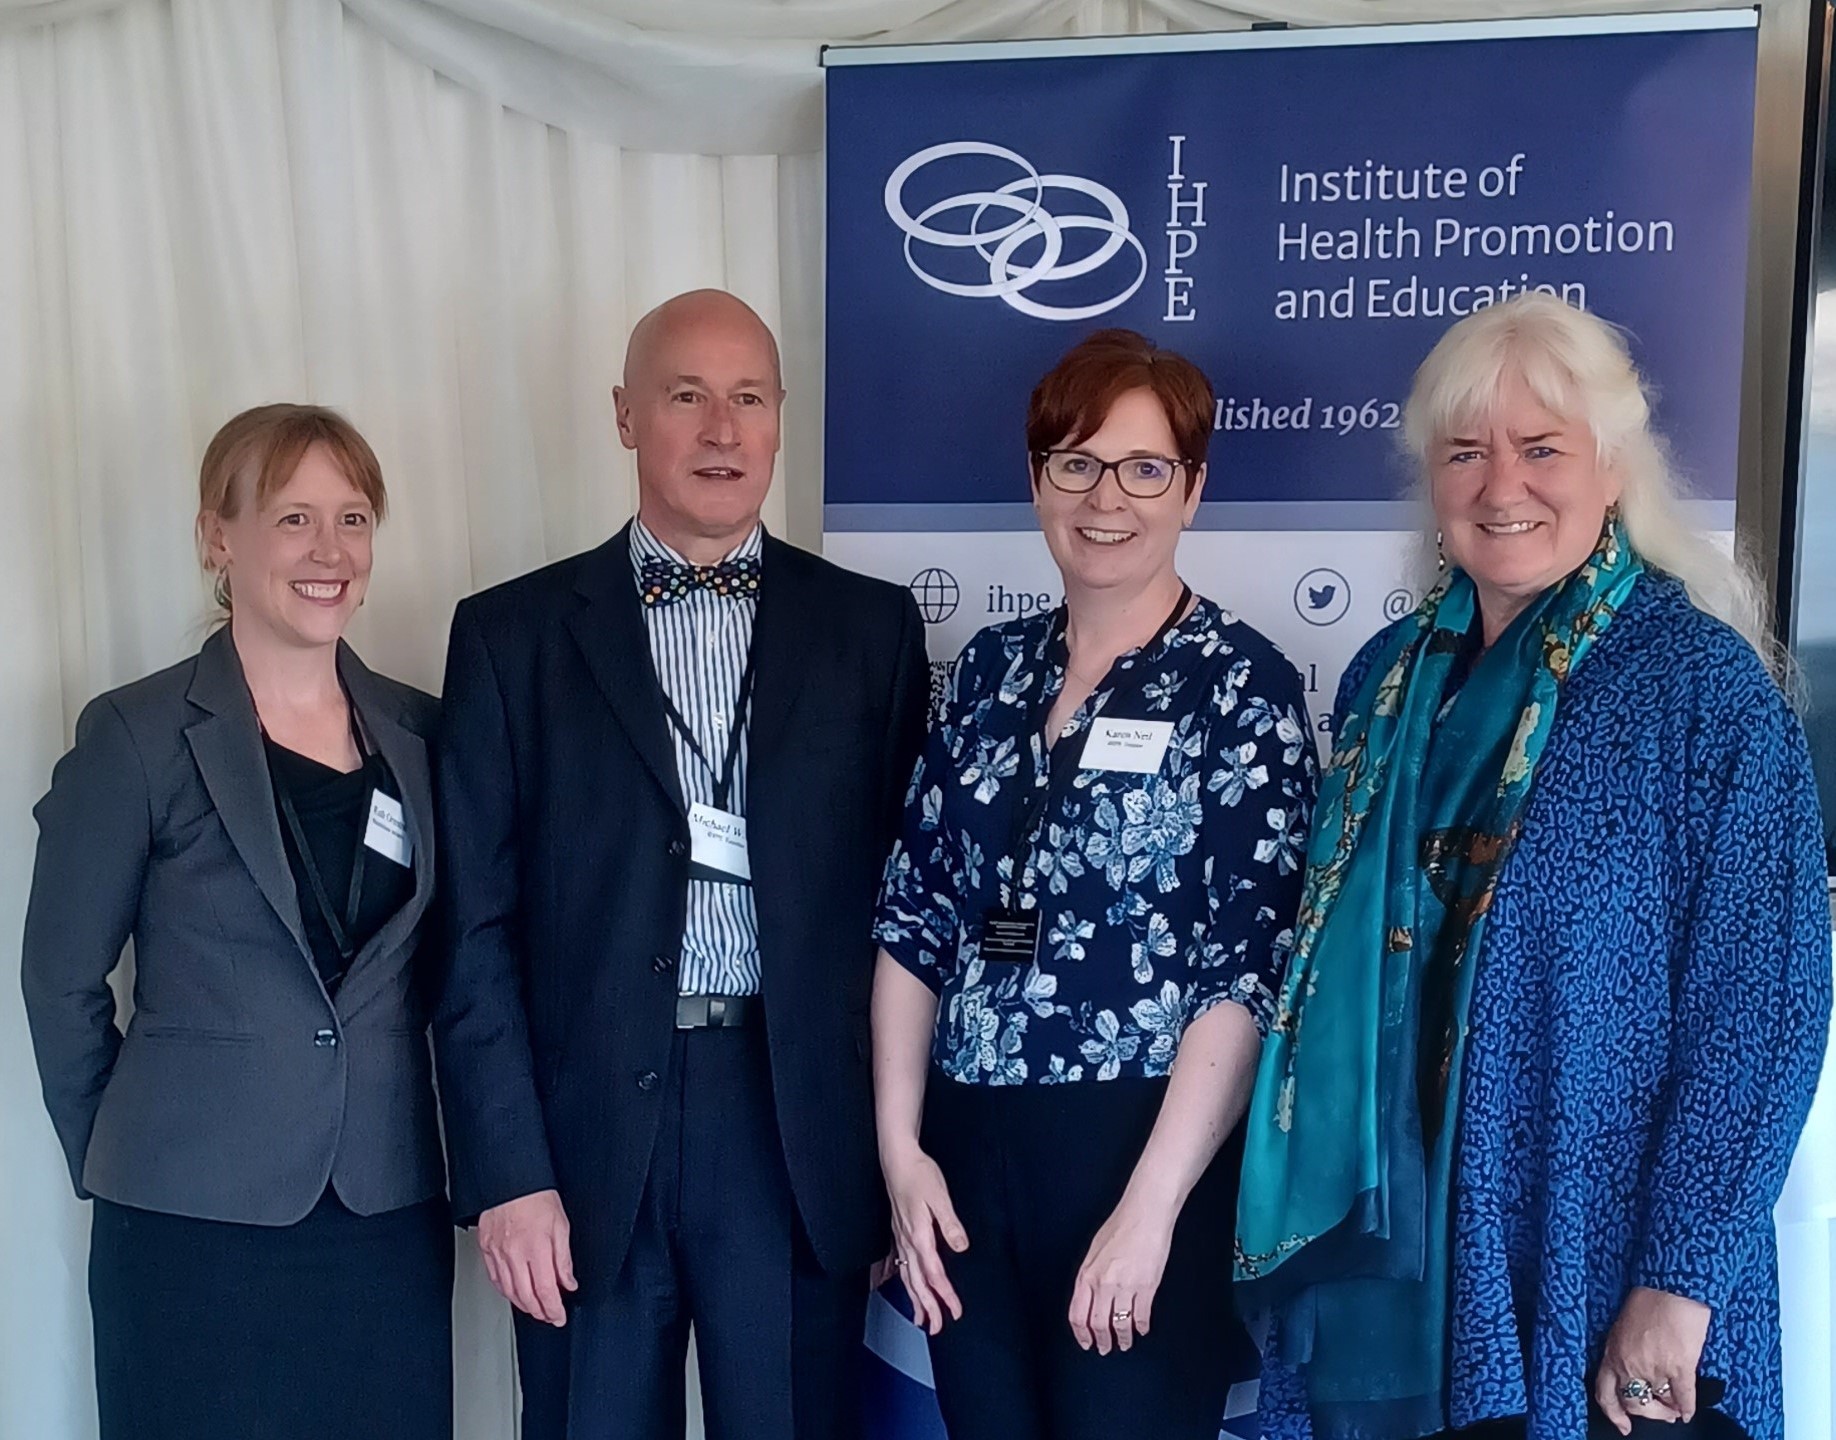 Karen Neil and co-authors at the House of Commons launch of the briefing paper at the 60th Anniversary celebration of the IHPE